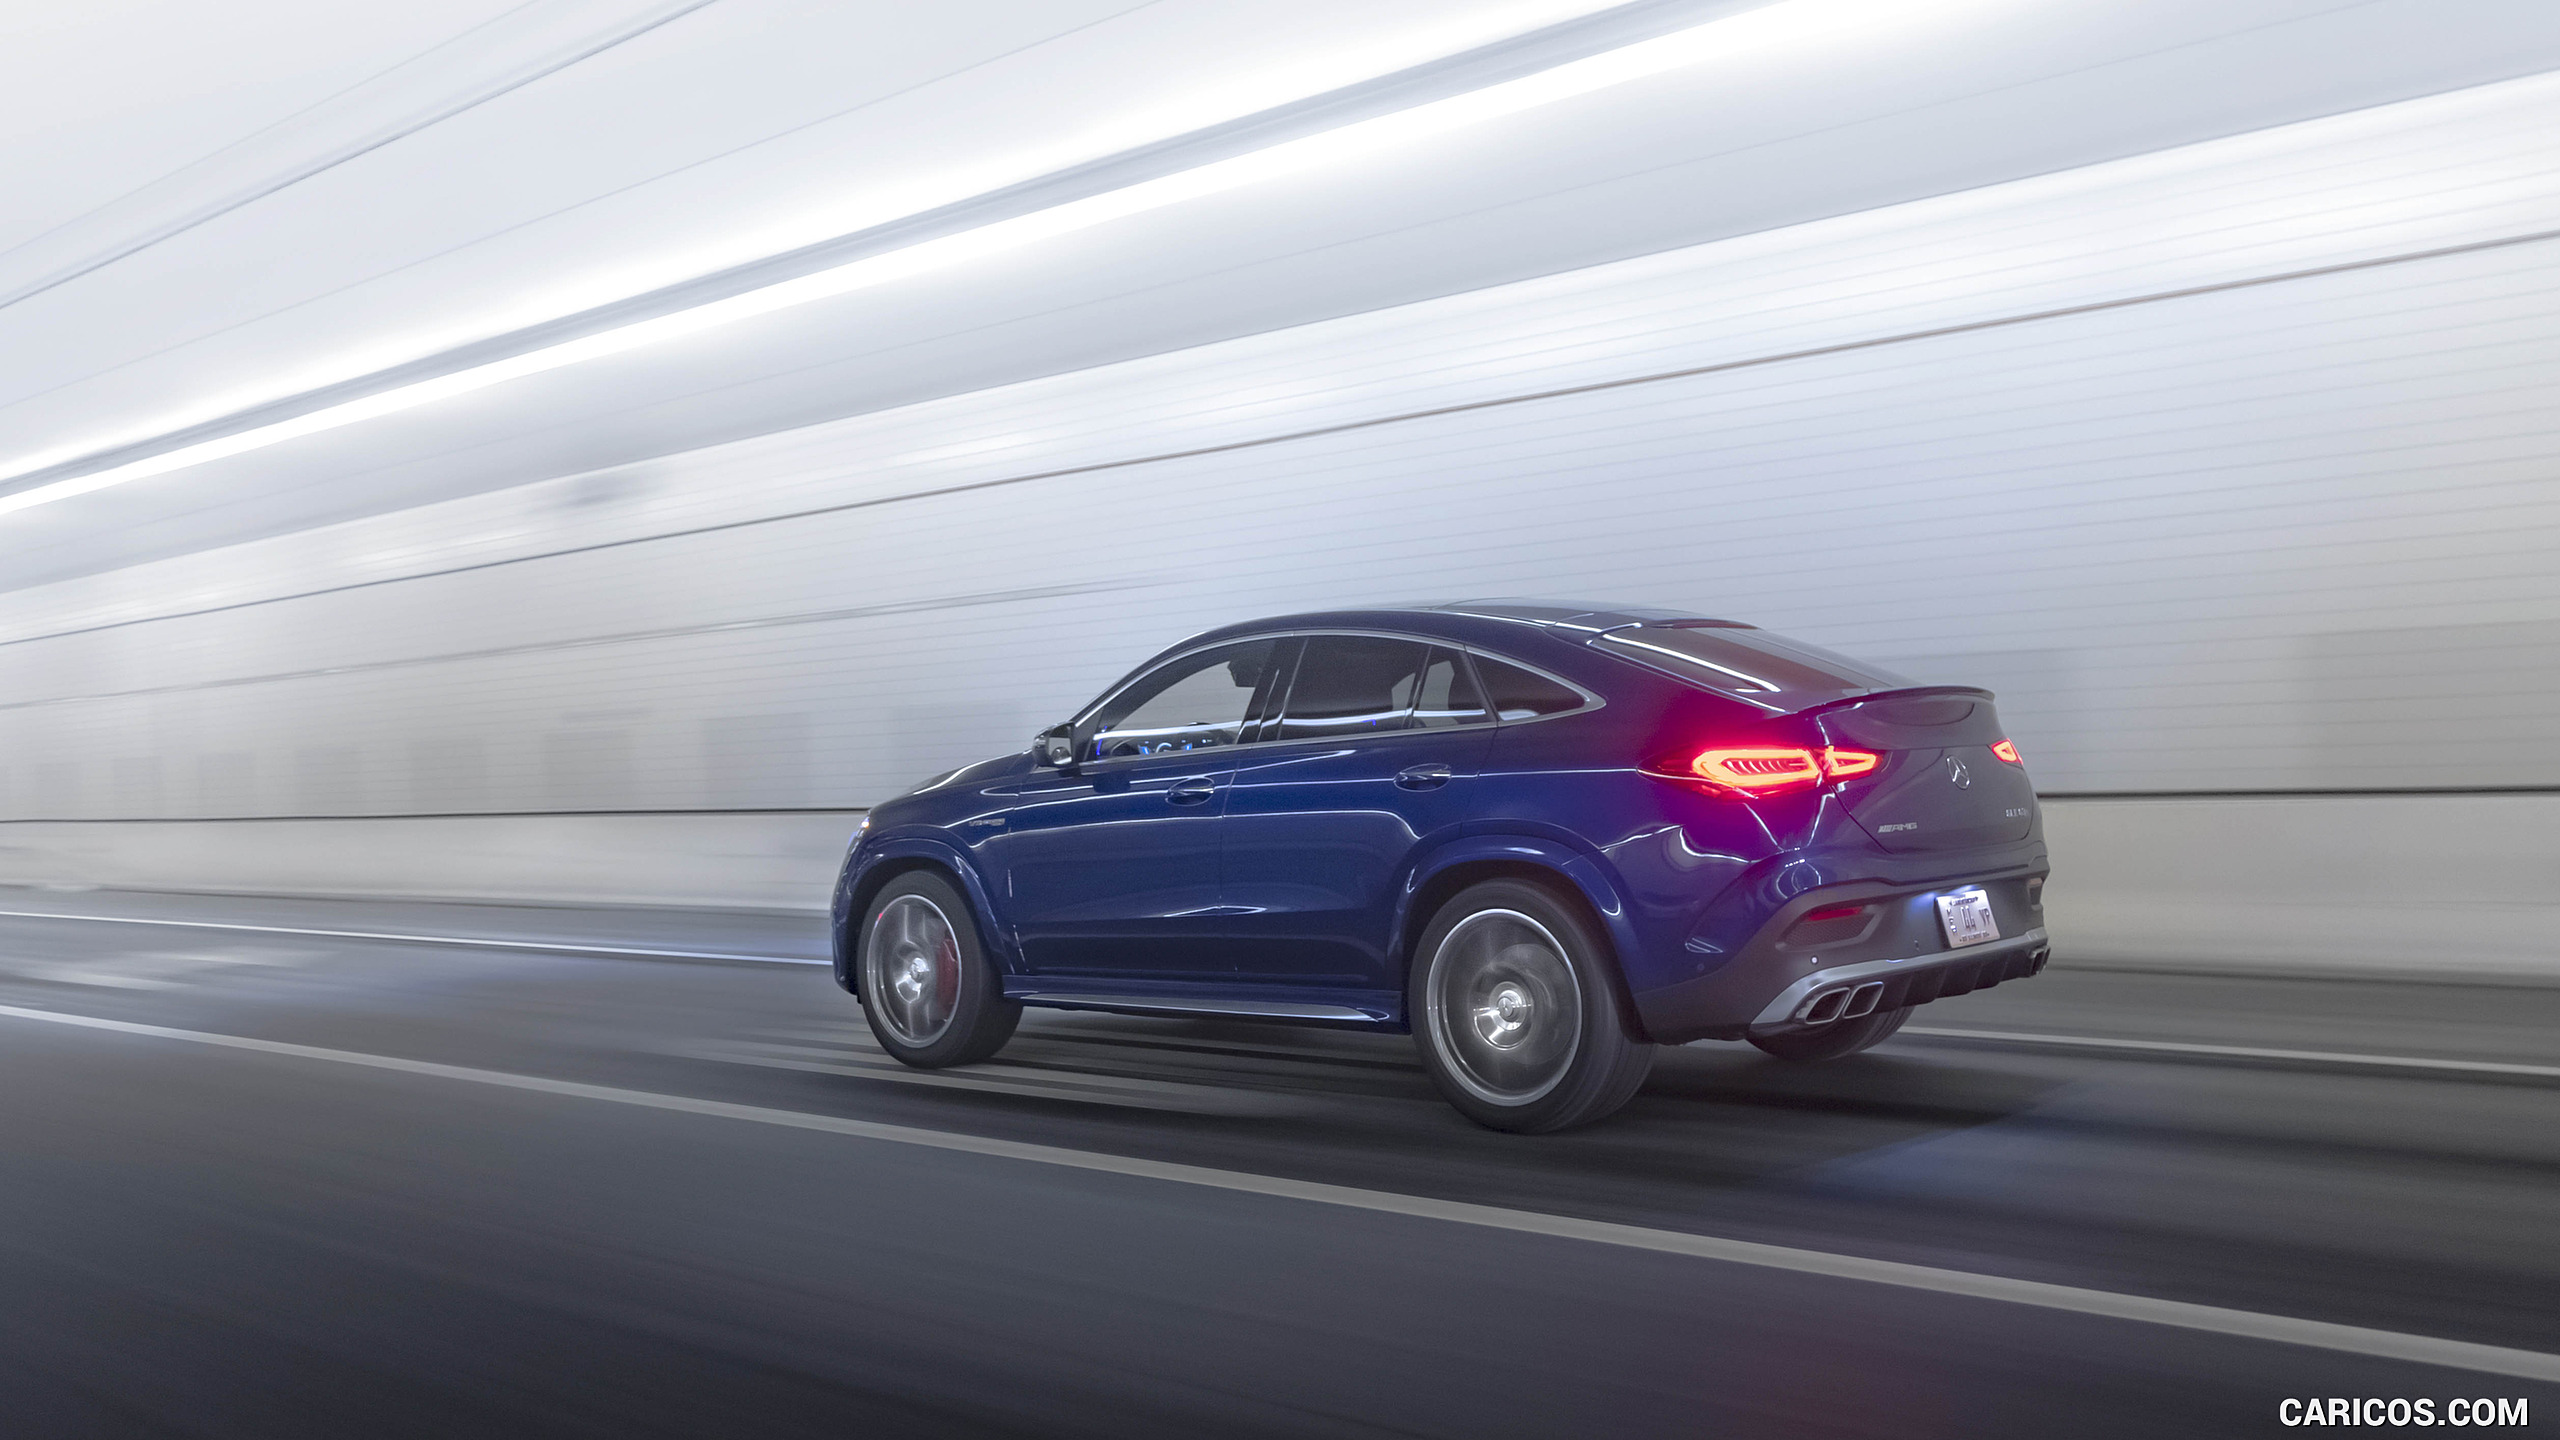 2021 Mercedes-AMG GLE 63 S Coupe (US-Spec) - Rear Three-Quarter, #36 of 66